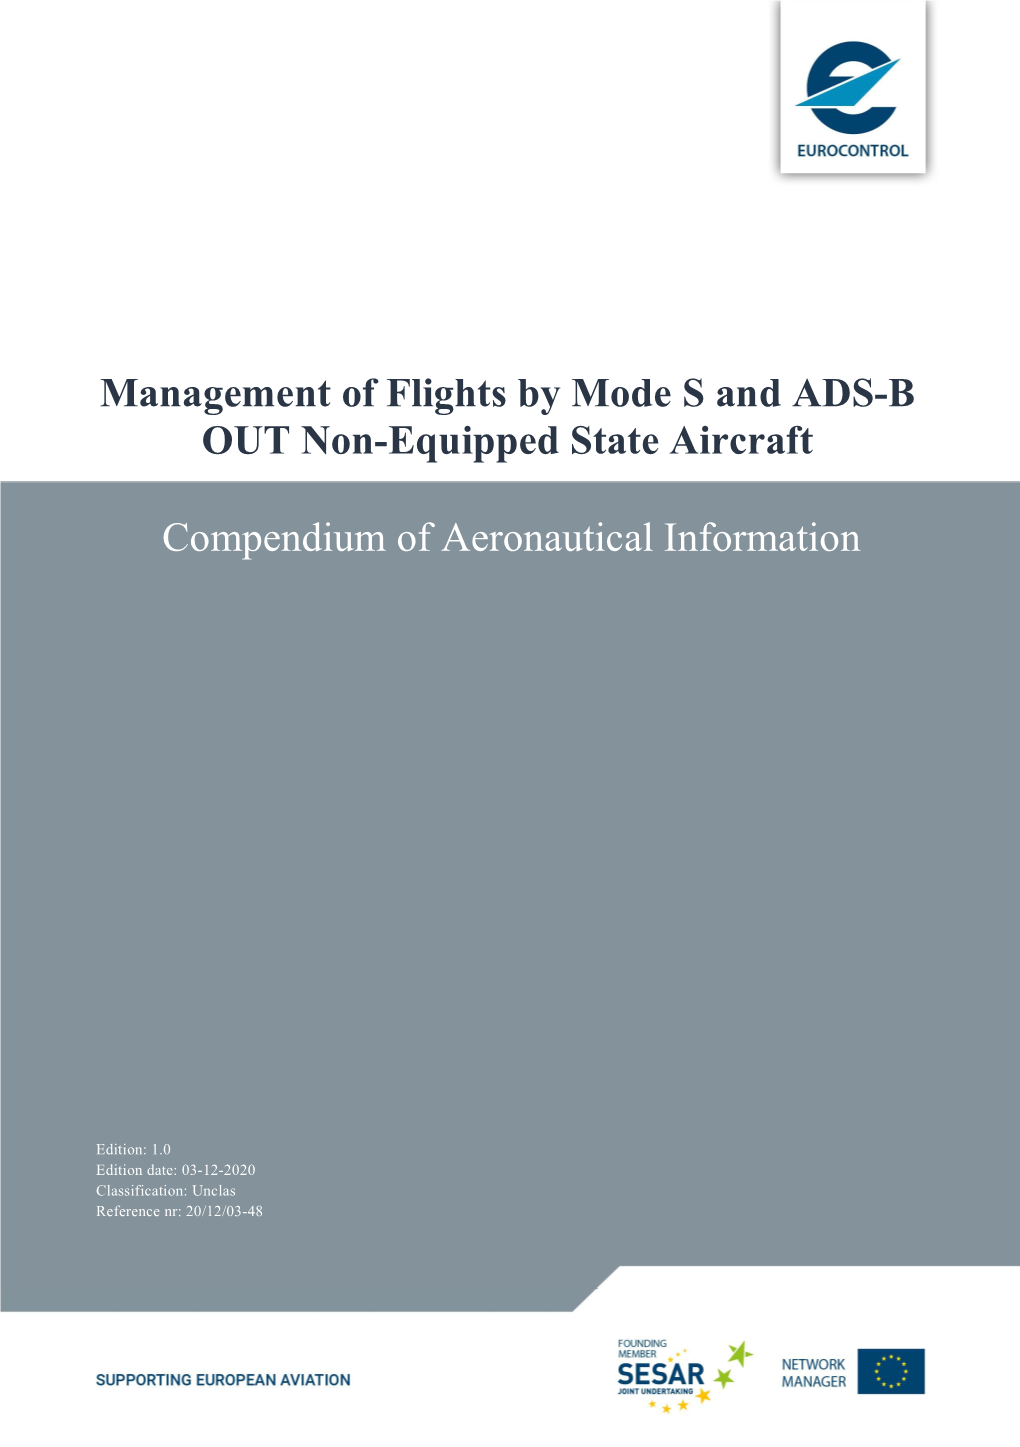 Management of Flights by Mode S and ADS-B out Non-Equipped State Aircraft